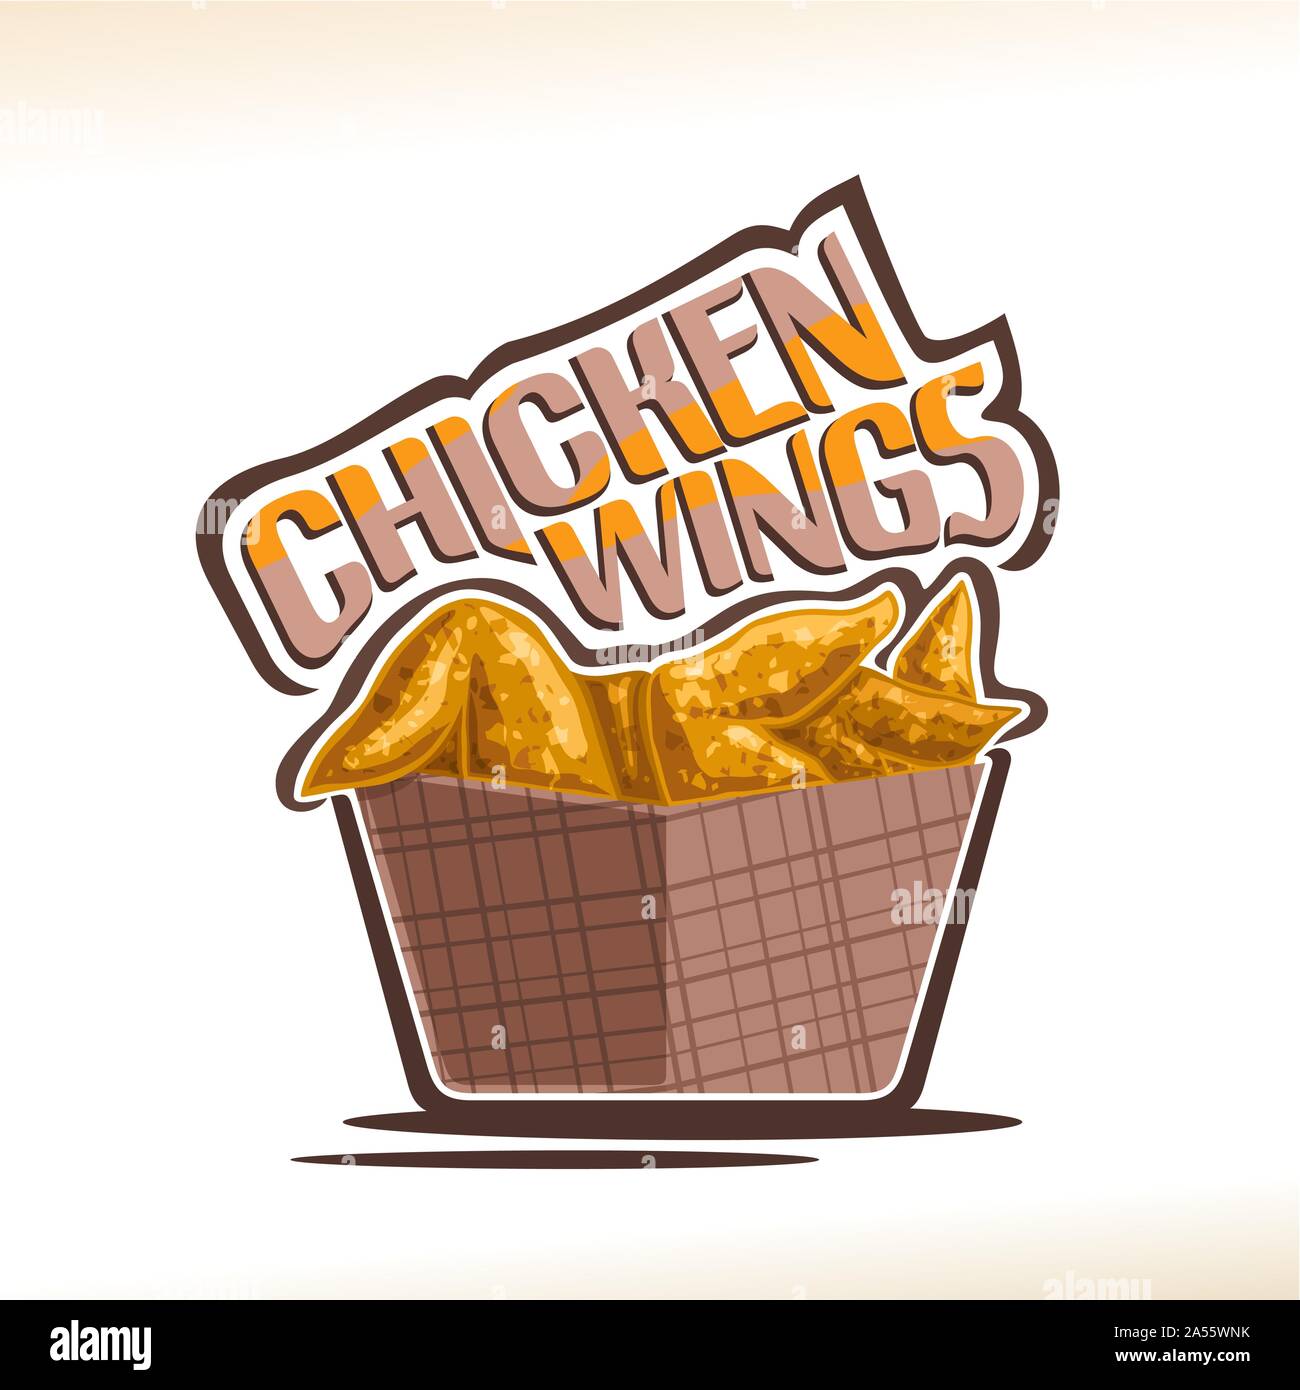 Vector logo for Chicken Wings, poster with crispy kentucky fried poultry in brown carton box, original typeface for words chicken wings, illustration Stock Vector